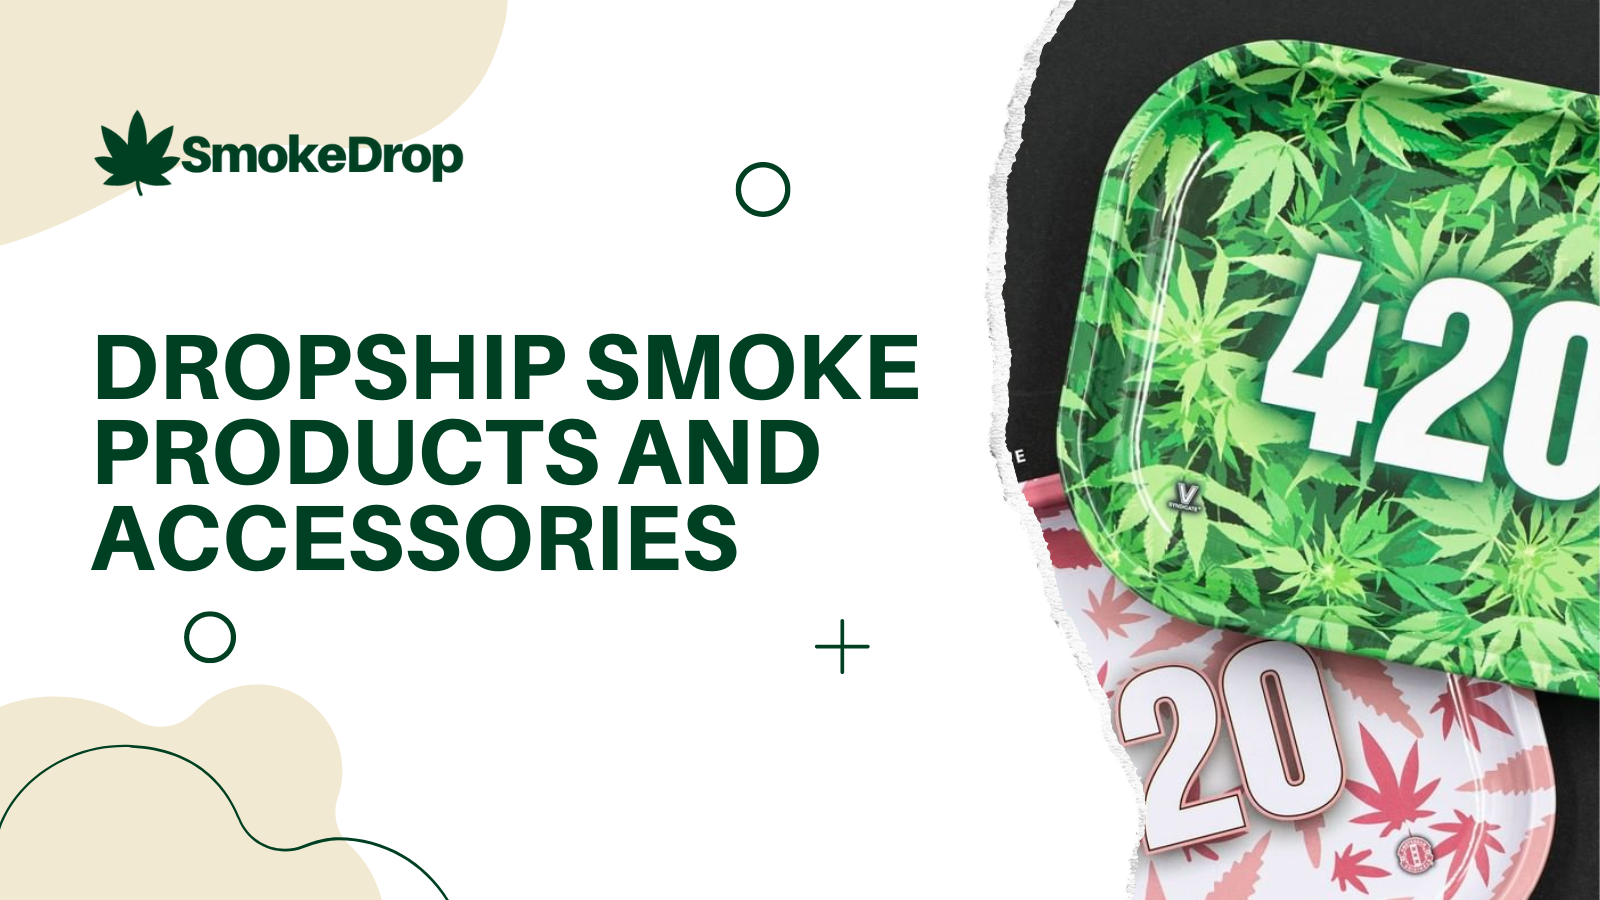 dropship smoke products and accessories banner